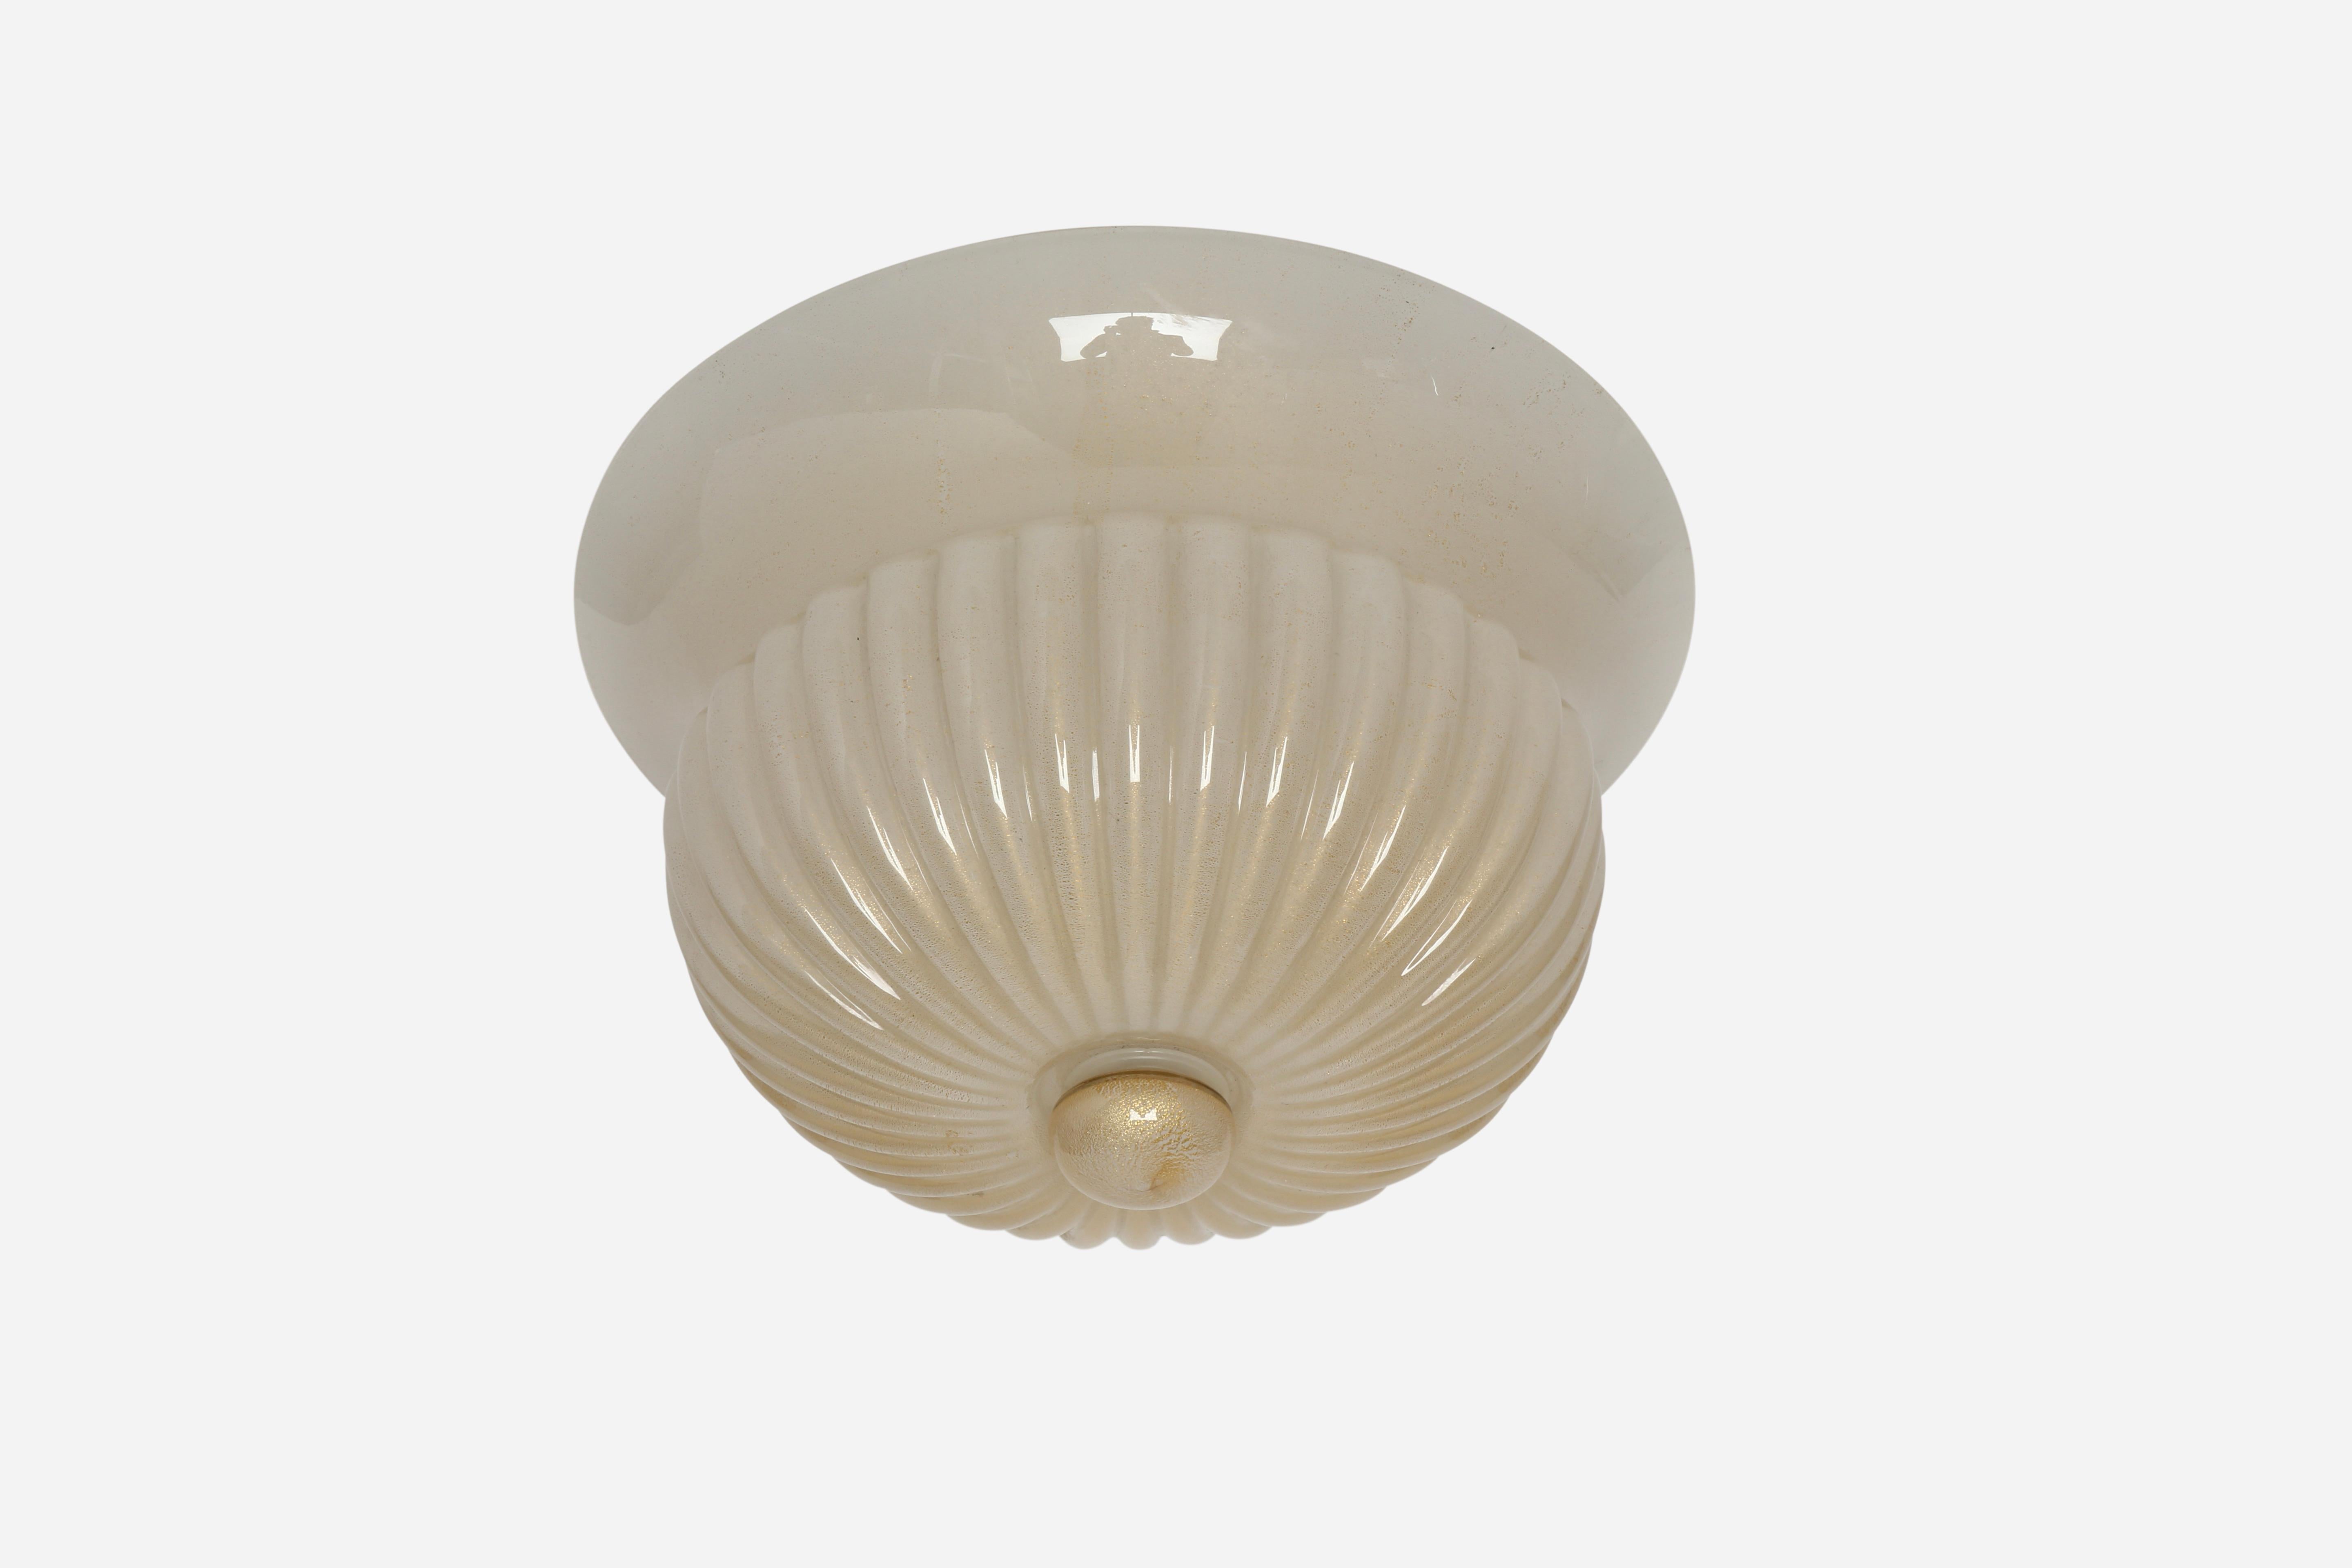 Murano glass flush mount ceiling light by Barovier & Toso.
Designed and made in Italy in 1970s.
Hand blown glass with gold leaf inclusions.
Has original sticker.
Three candelabra bulbs. 
Complimentary US rewiring upon request.